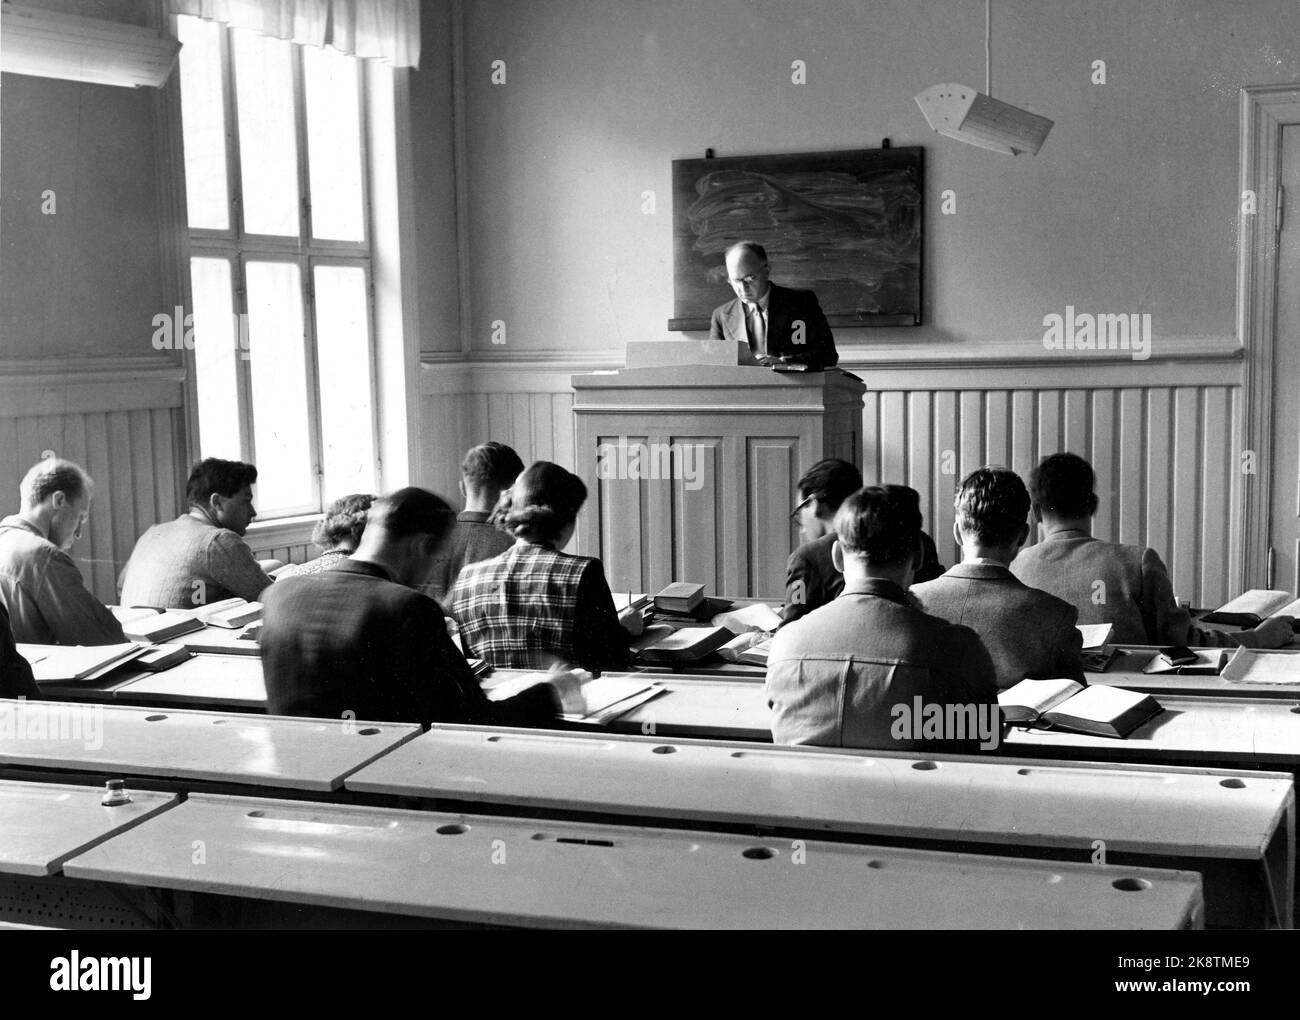 Oslo 1953; The report provides insight into the church battle around the private 'university' Faculty of the Church with sulfur preacher and Professor Dr. Philos. Ole Hallesby at the forefront of the Libereal Bishop Dr. Theol. Kristian Schjelderup. The pictures are from the Faculty of the Church in St. Olavsgate 29. The students have gathered under the lecturer (in the New Testament), Sverre Aalen's catheter. A female student among men. MF was against female priests. Women could only work as a hospital priests, not in churches. The auditorium is spartan equipped. Theology. Photo: Current / NTB Stock Photo